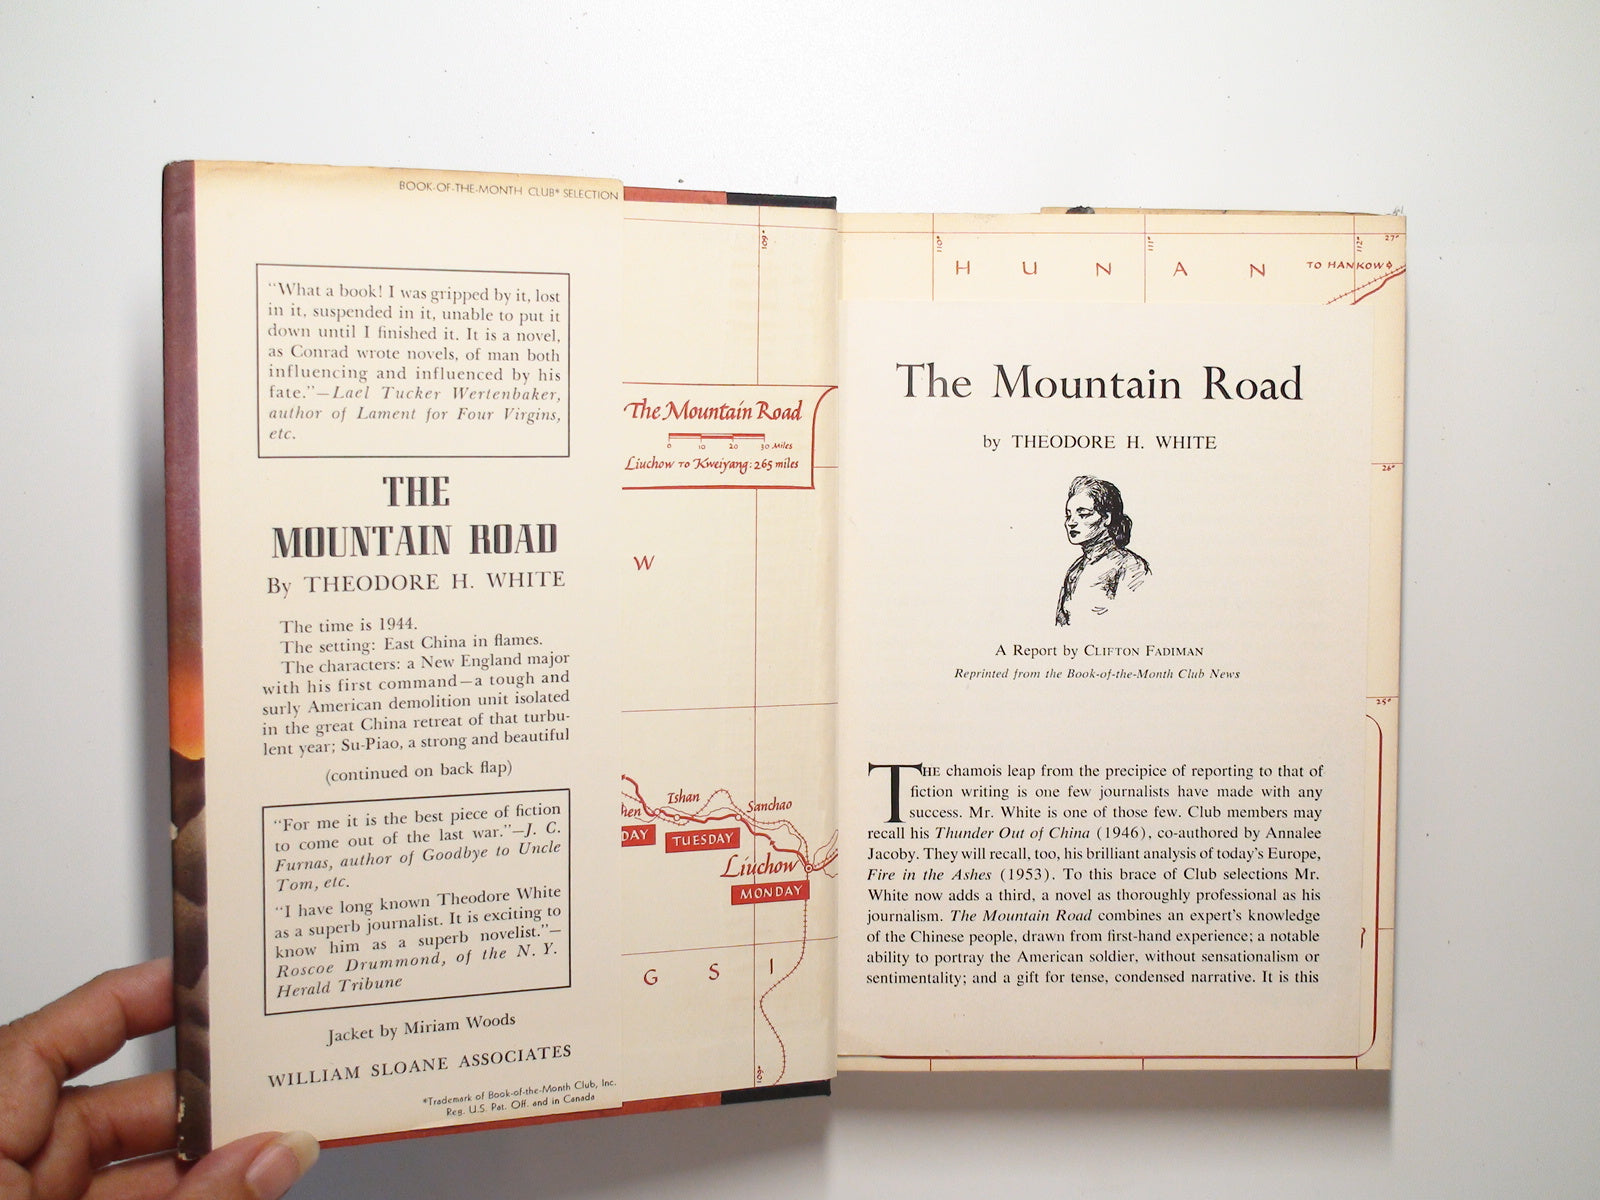 The Mountain Road, by Theodore H. White, Hardcover w/ D/J, Book Club, 1958